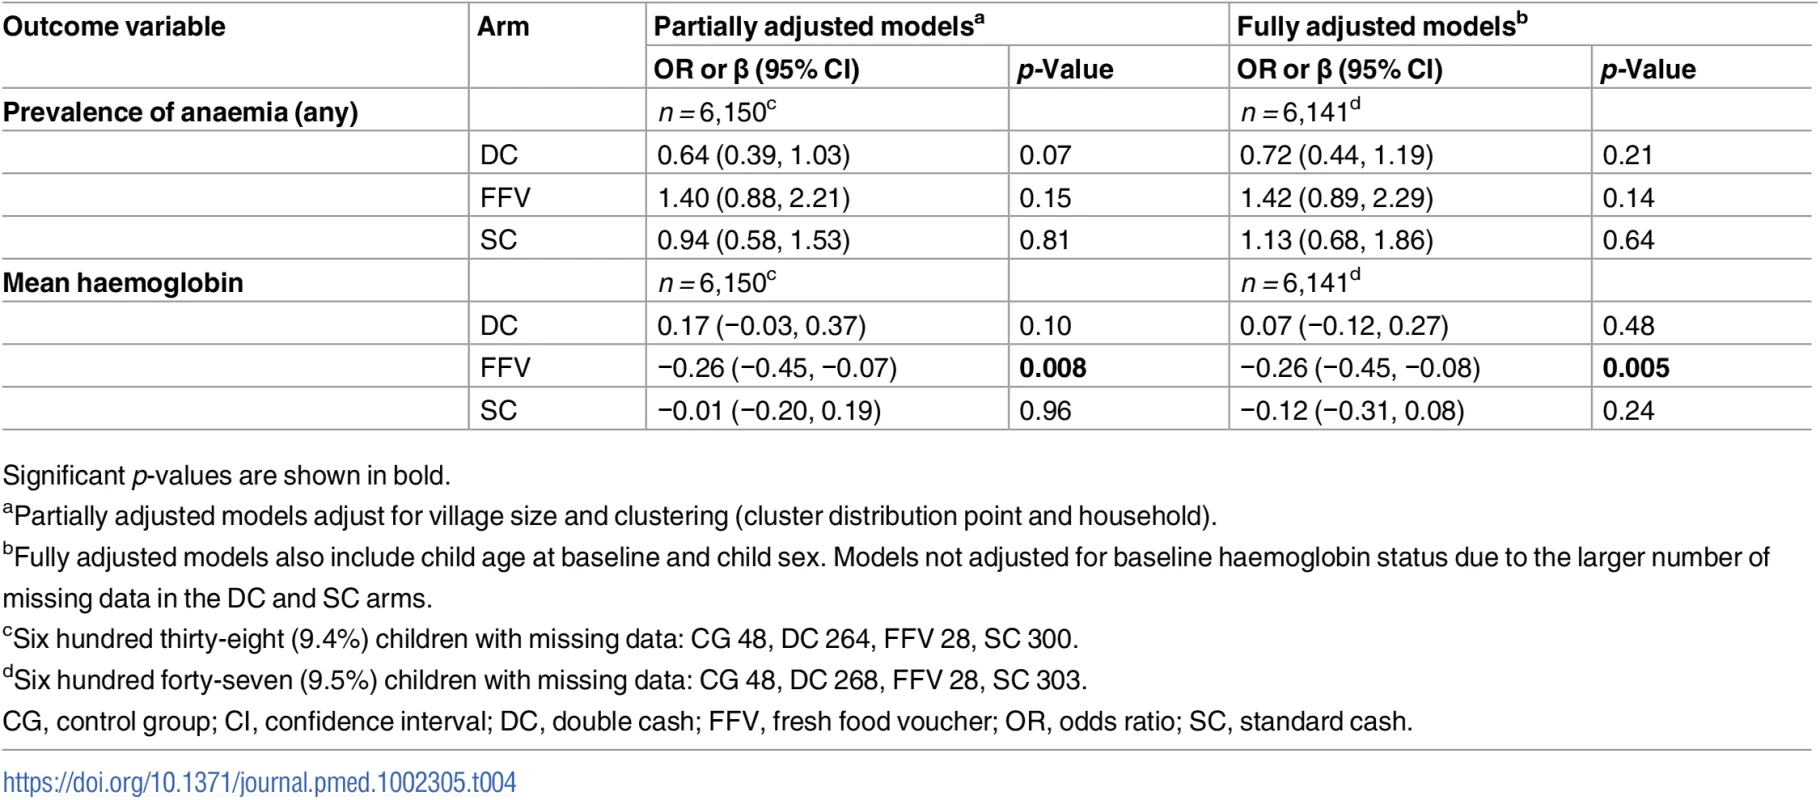 Multilevel mixed-effects models estimating odds ratios and regression coefficients (β) for anaemia and haemoglobin status outcomes for children by intervention arm compared to the control group at 6 mo.